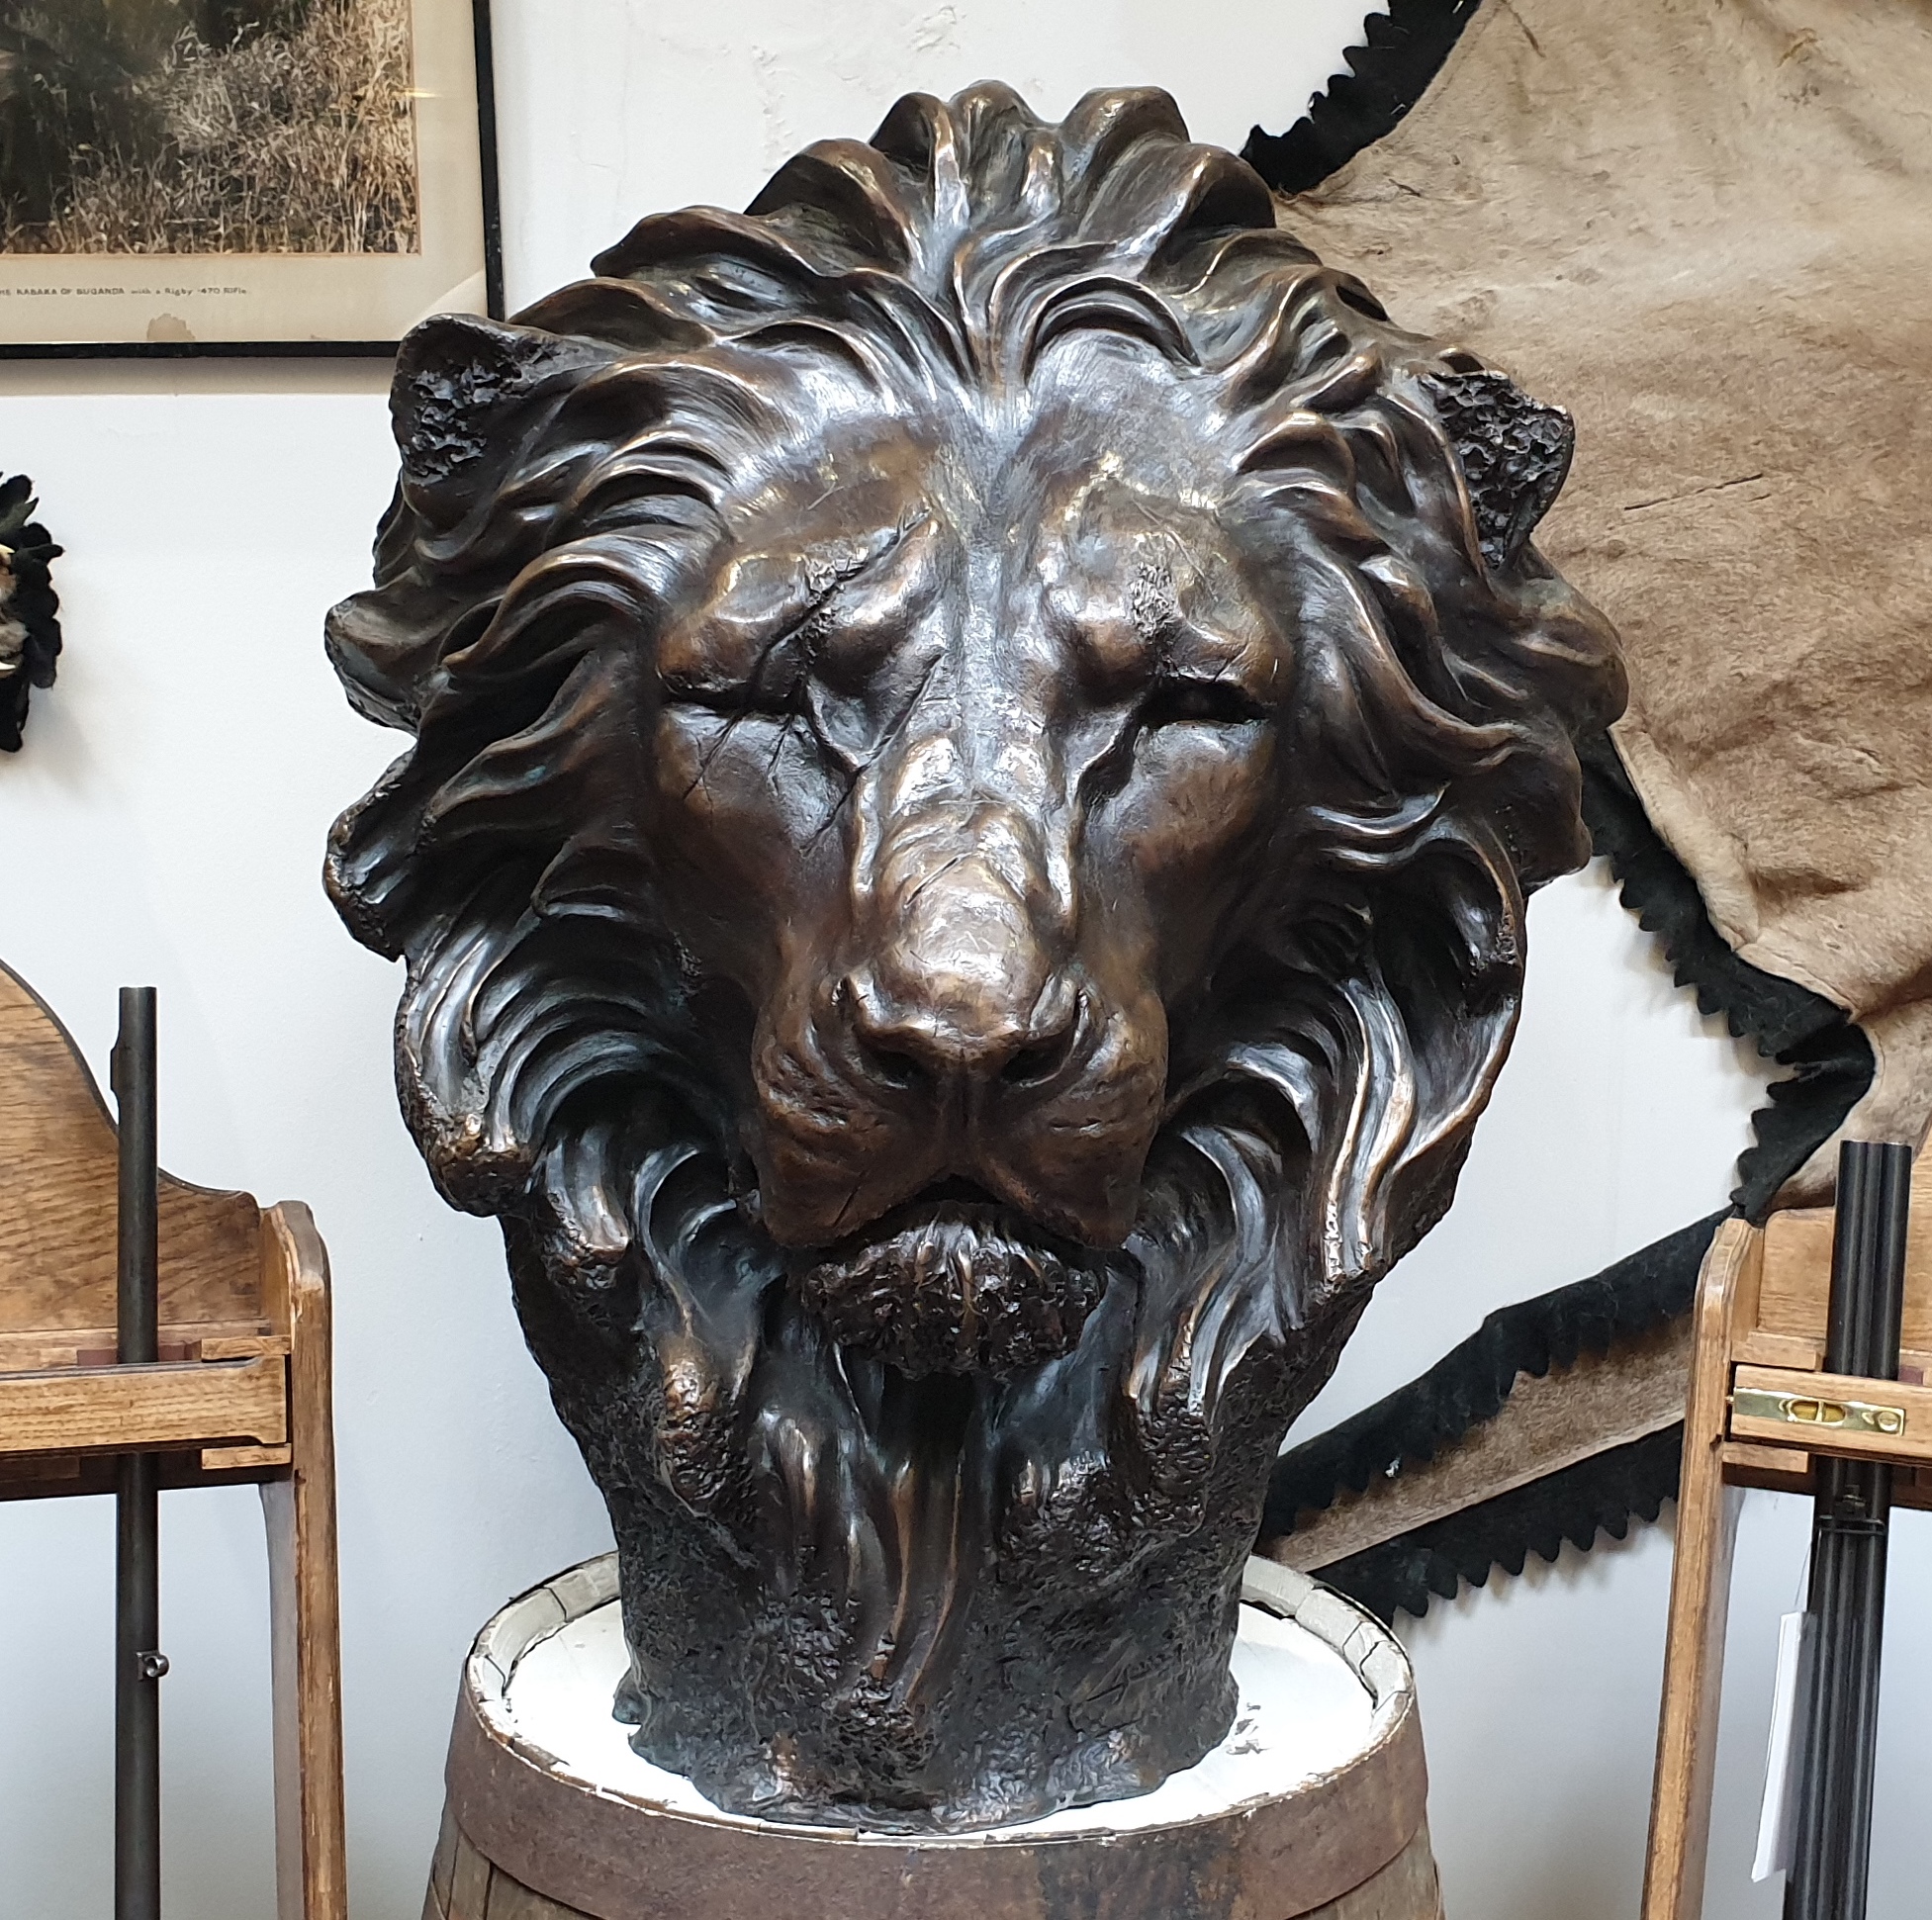 The price of the reign” Limited edition bronze sculpture - John Rigby & Co.